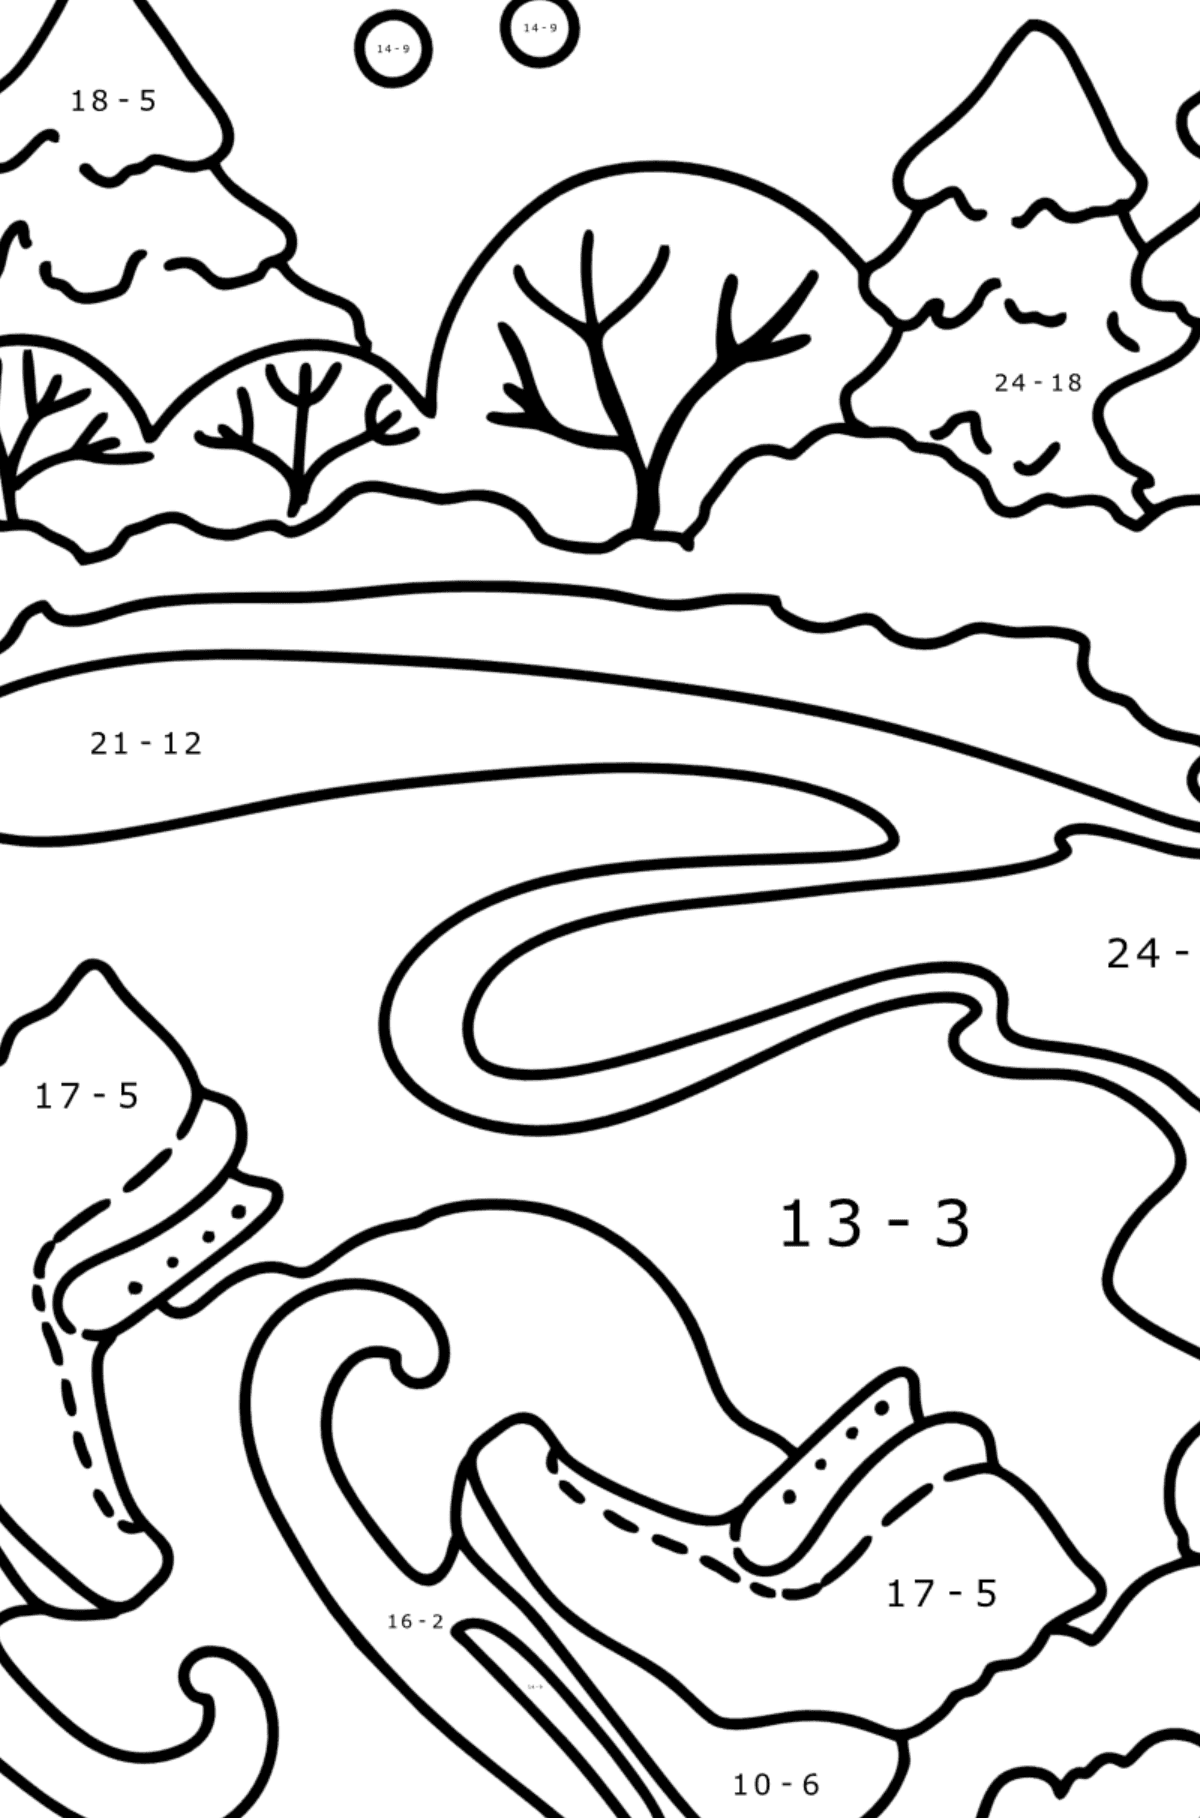 Coloring page - Winter and skates - Math Coloring - Subtraction for Kids